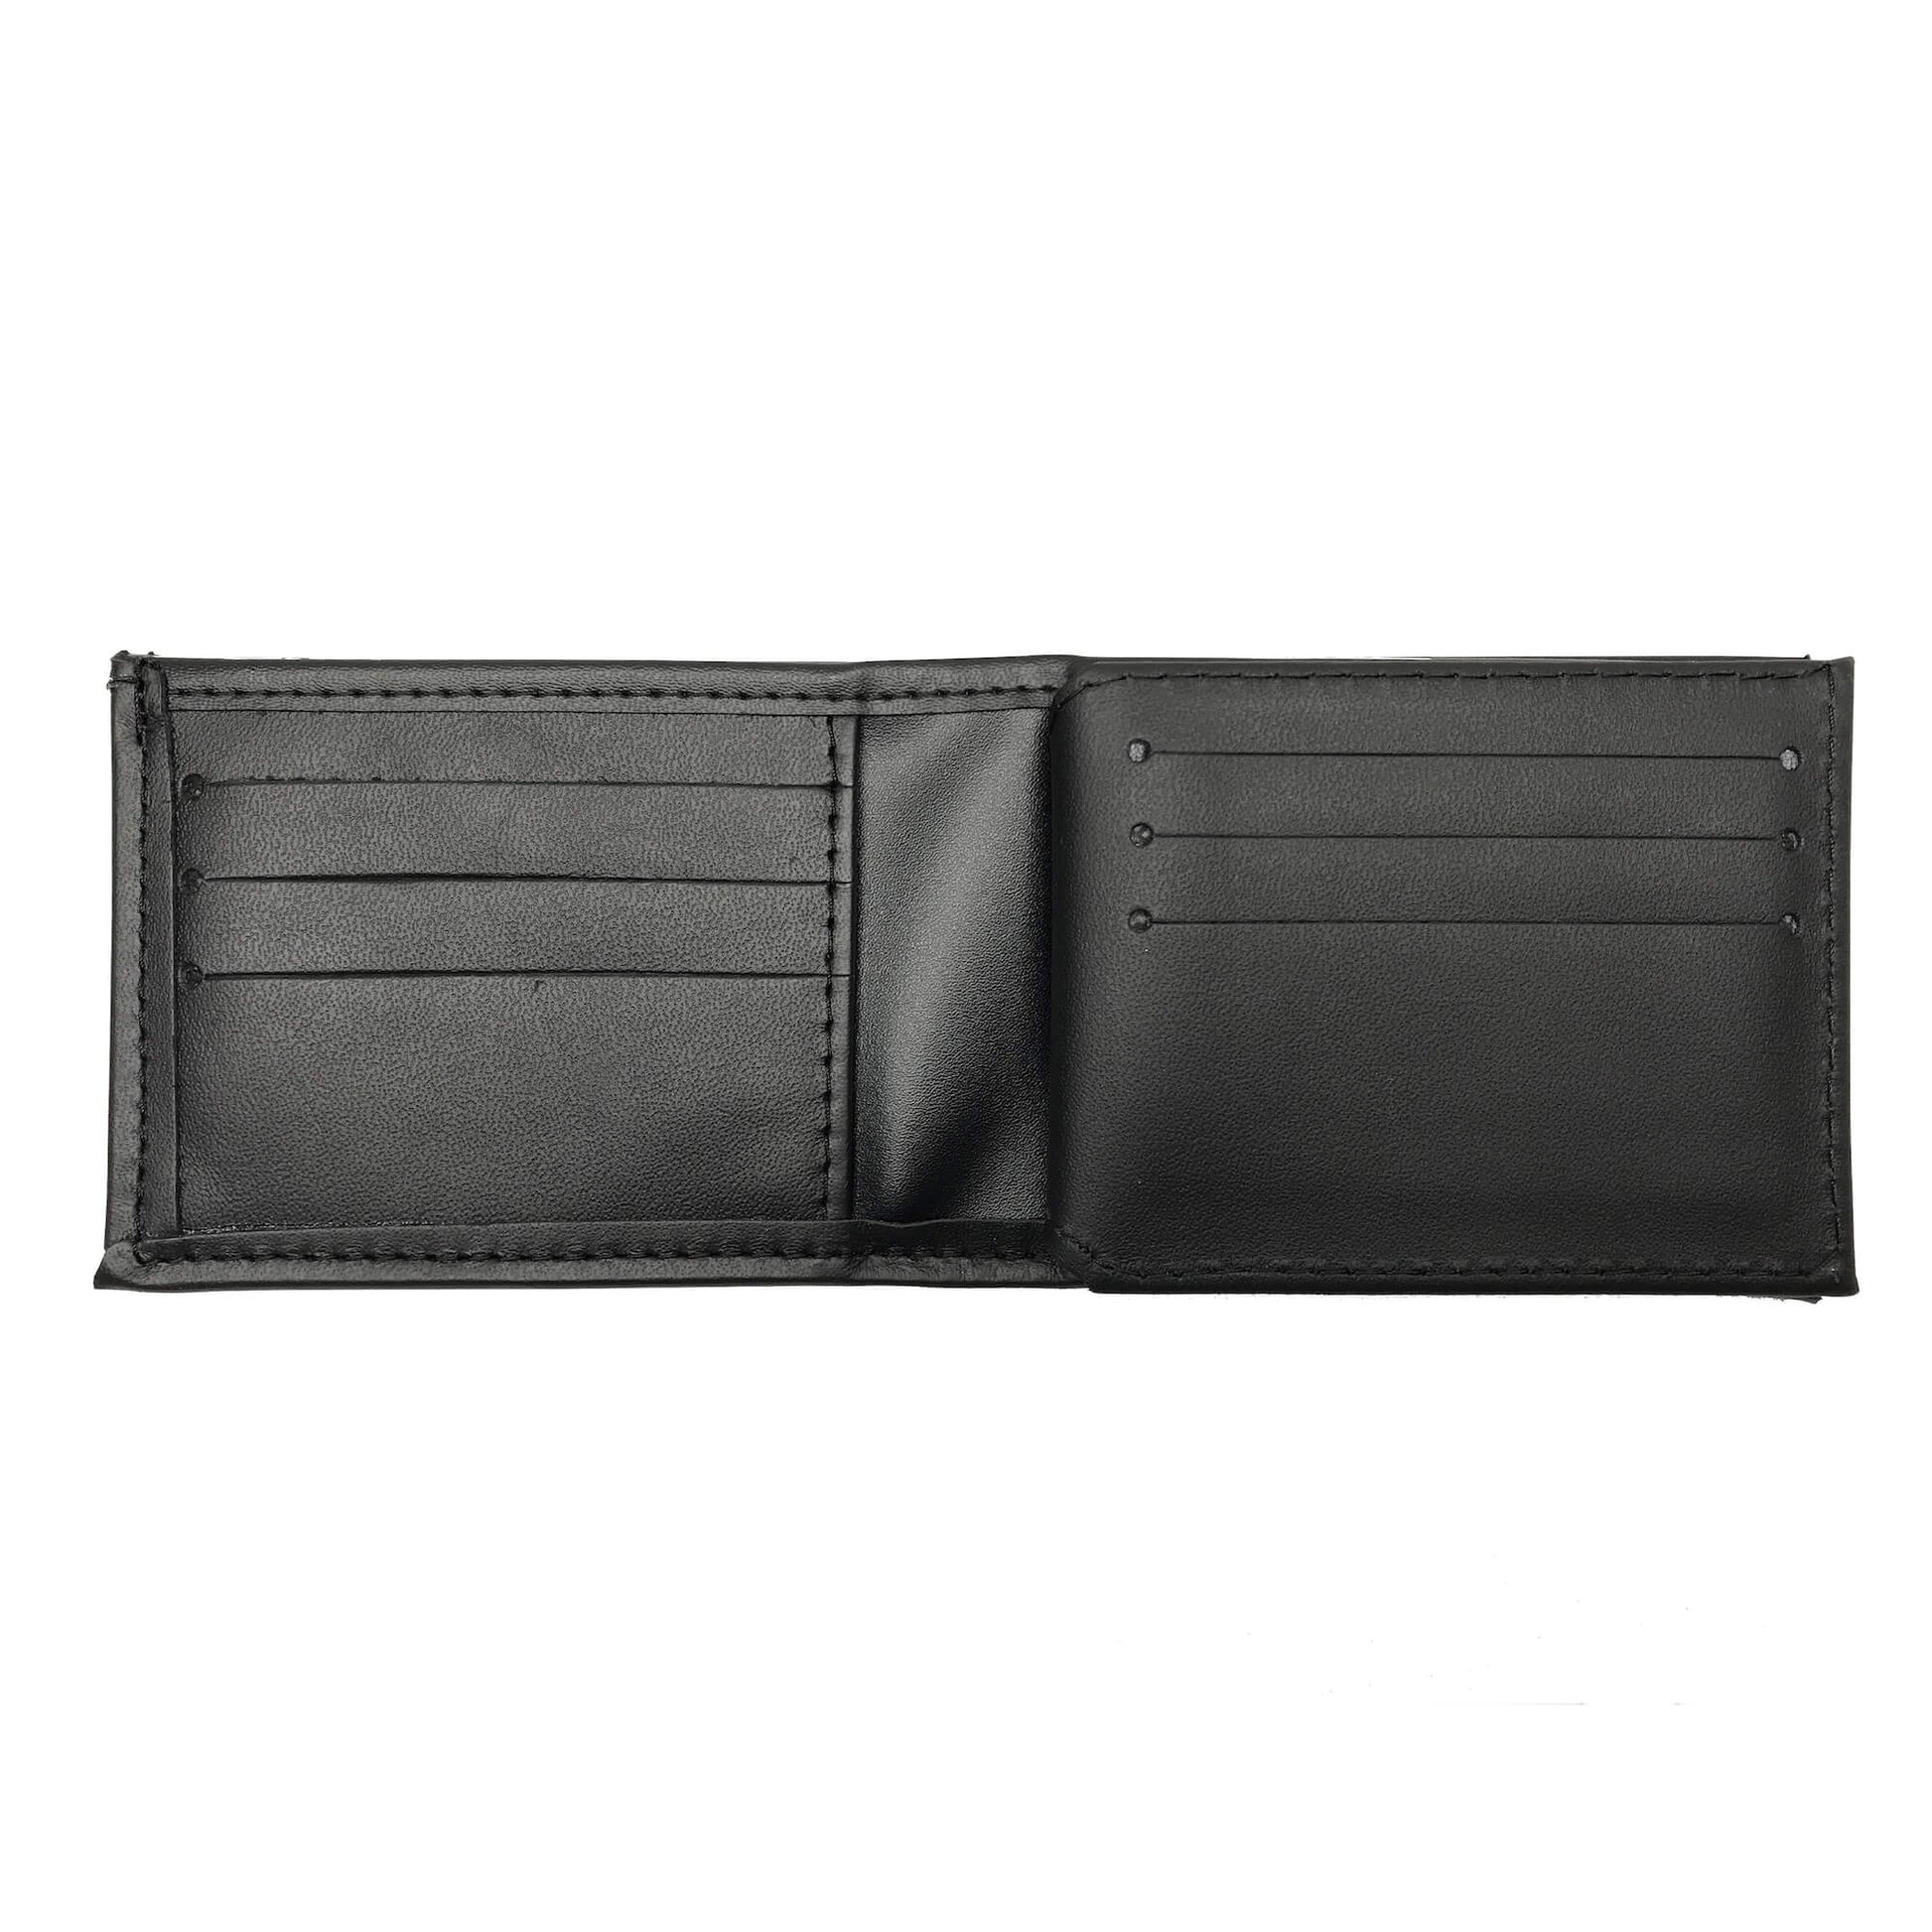 New Jersey Department of Corrections (DOC) Sergeant & Up Horizontal Bifold Hidden Badge Wallet-Perfect Fit-911 Duty Gear USA